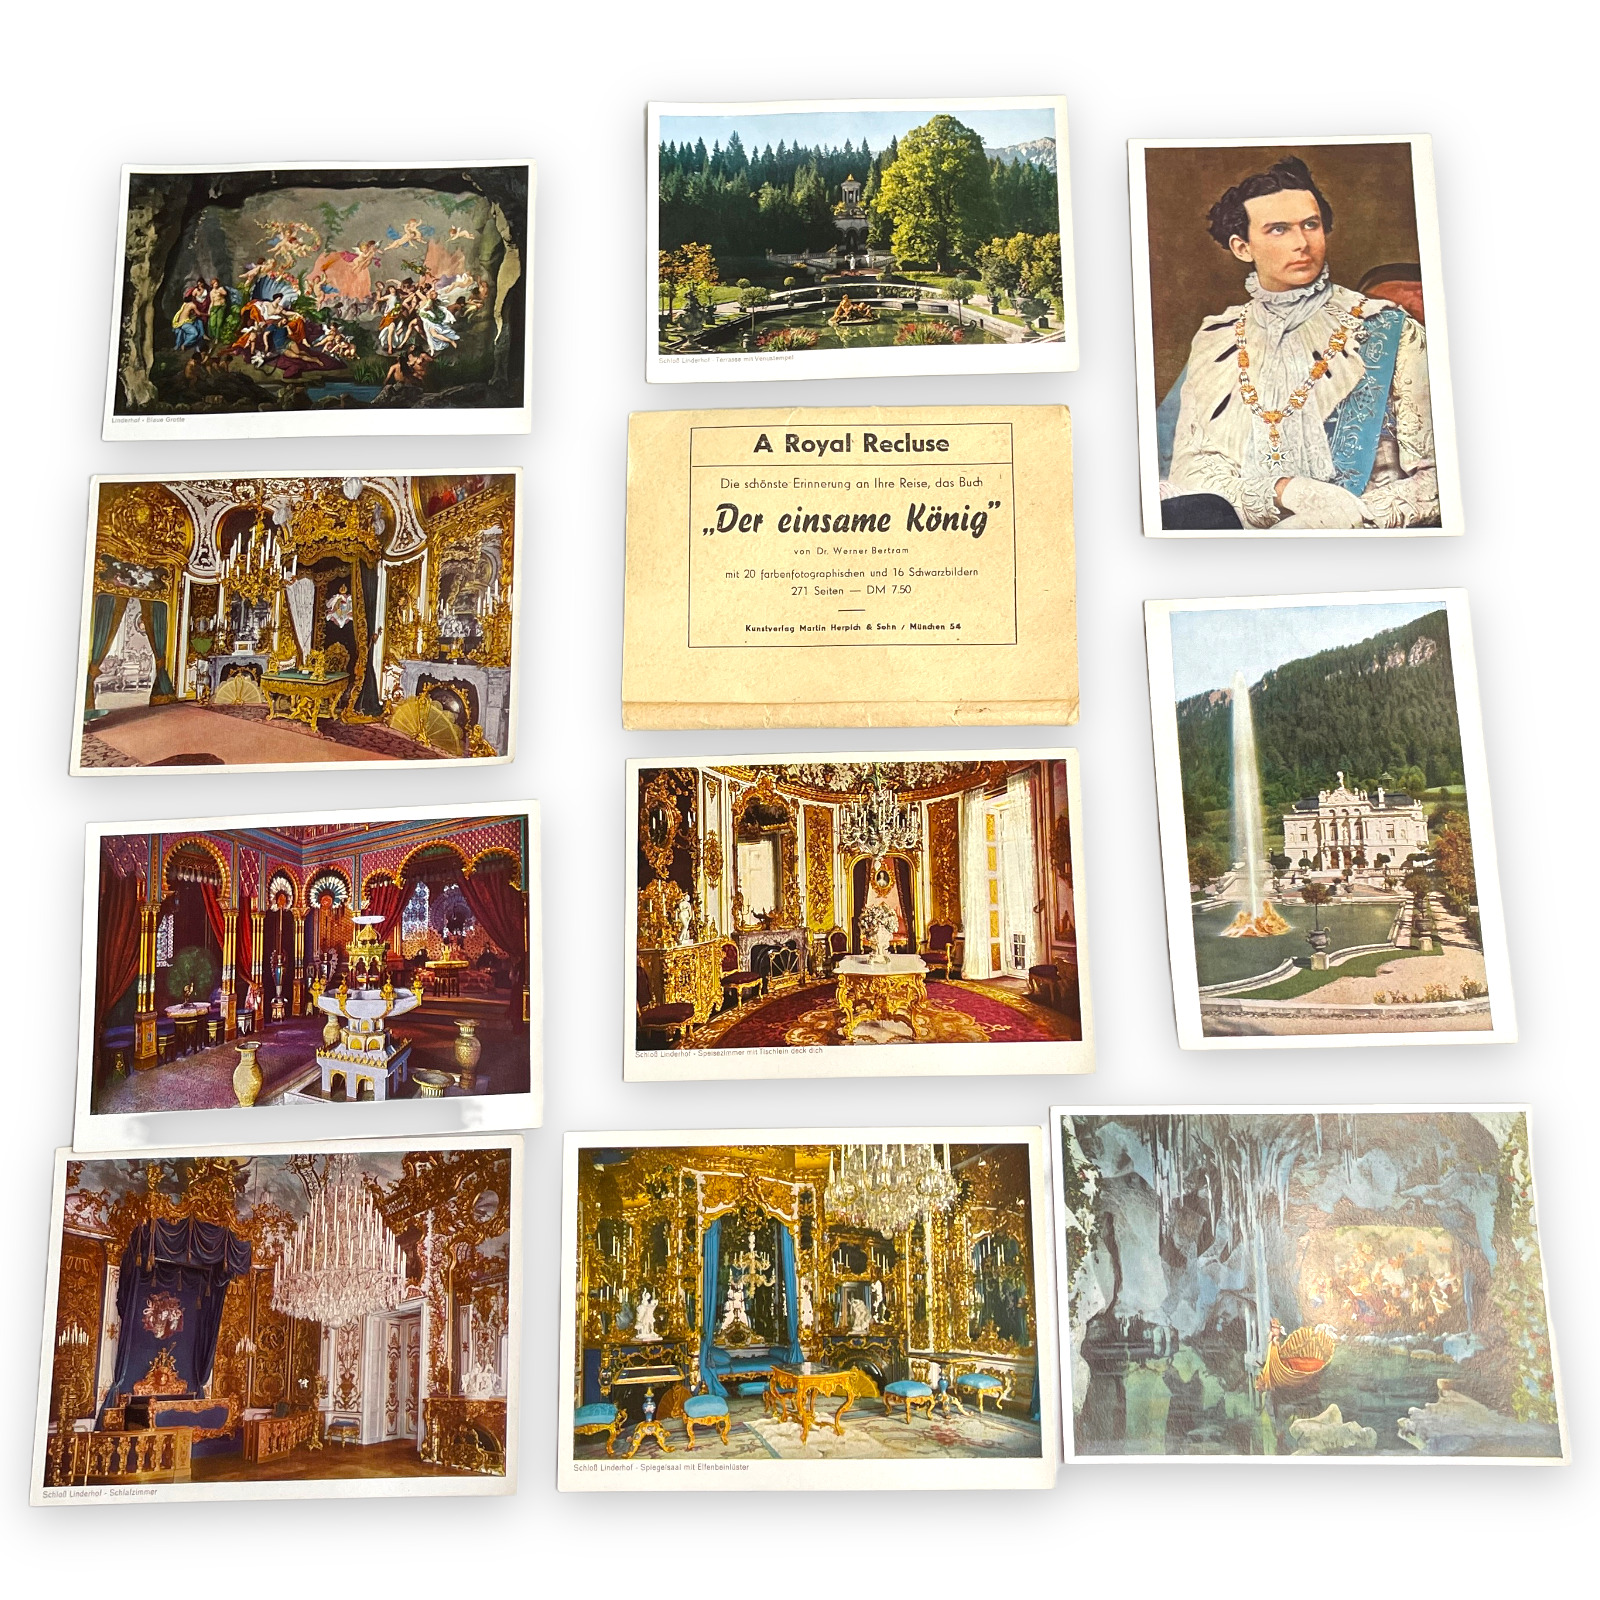 POSTCARD OF KING LUDWIG II A ROYAL RECLUSE AND CASTLE LINDERHOF PALACE VINTAGE